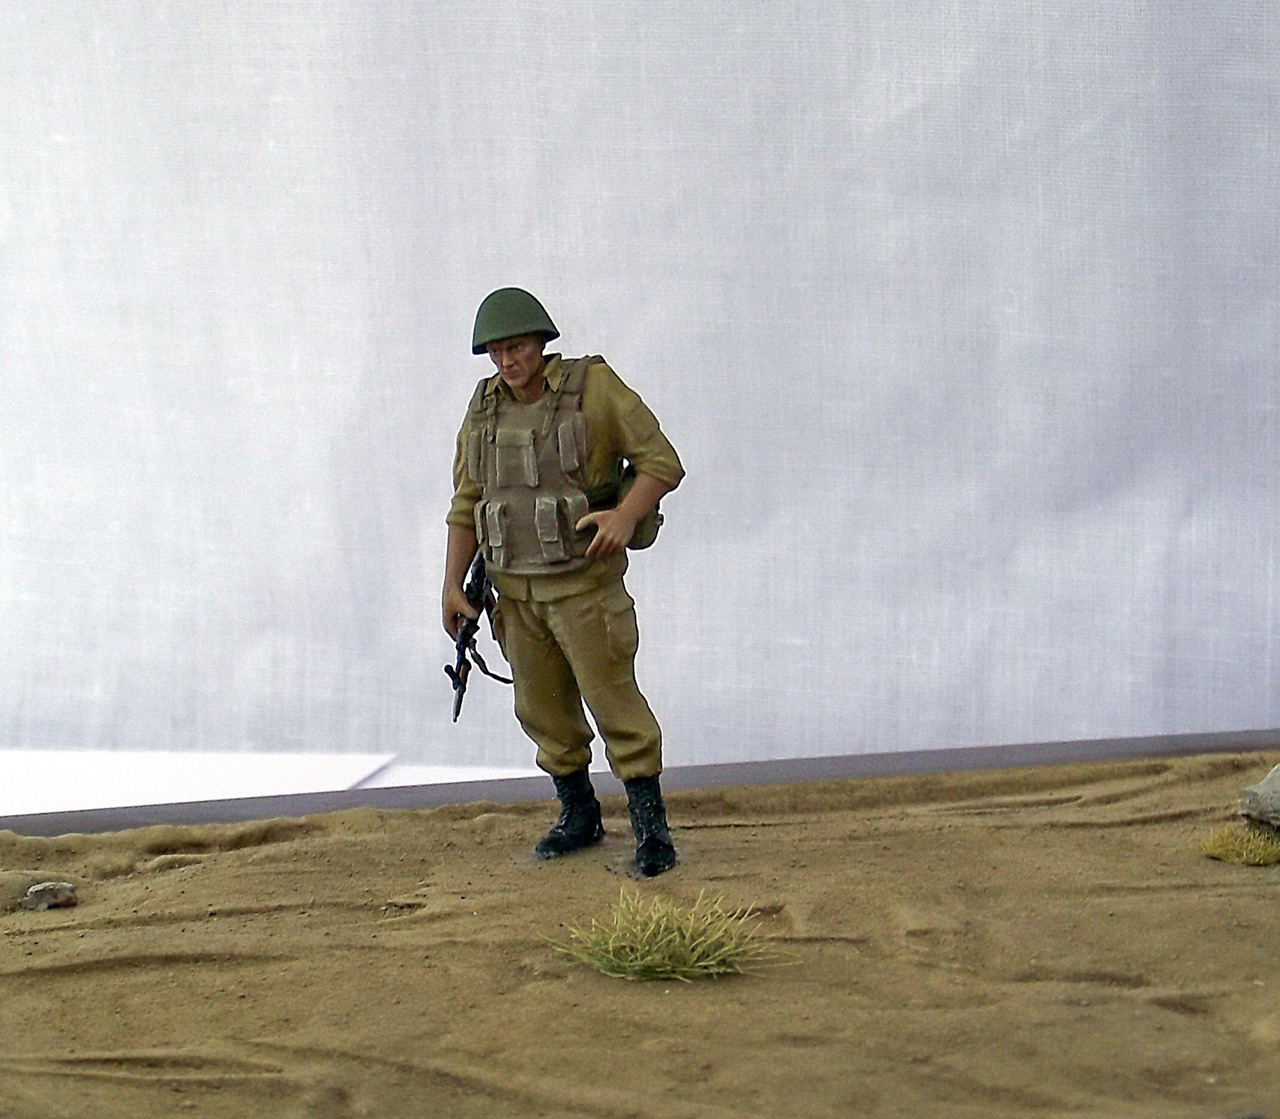 Dioramas and Vignettes: Demobilization is soon!, photo #34